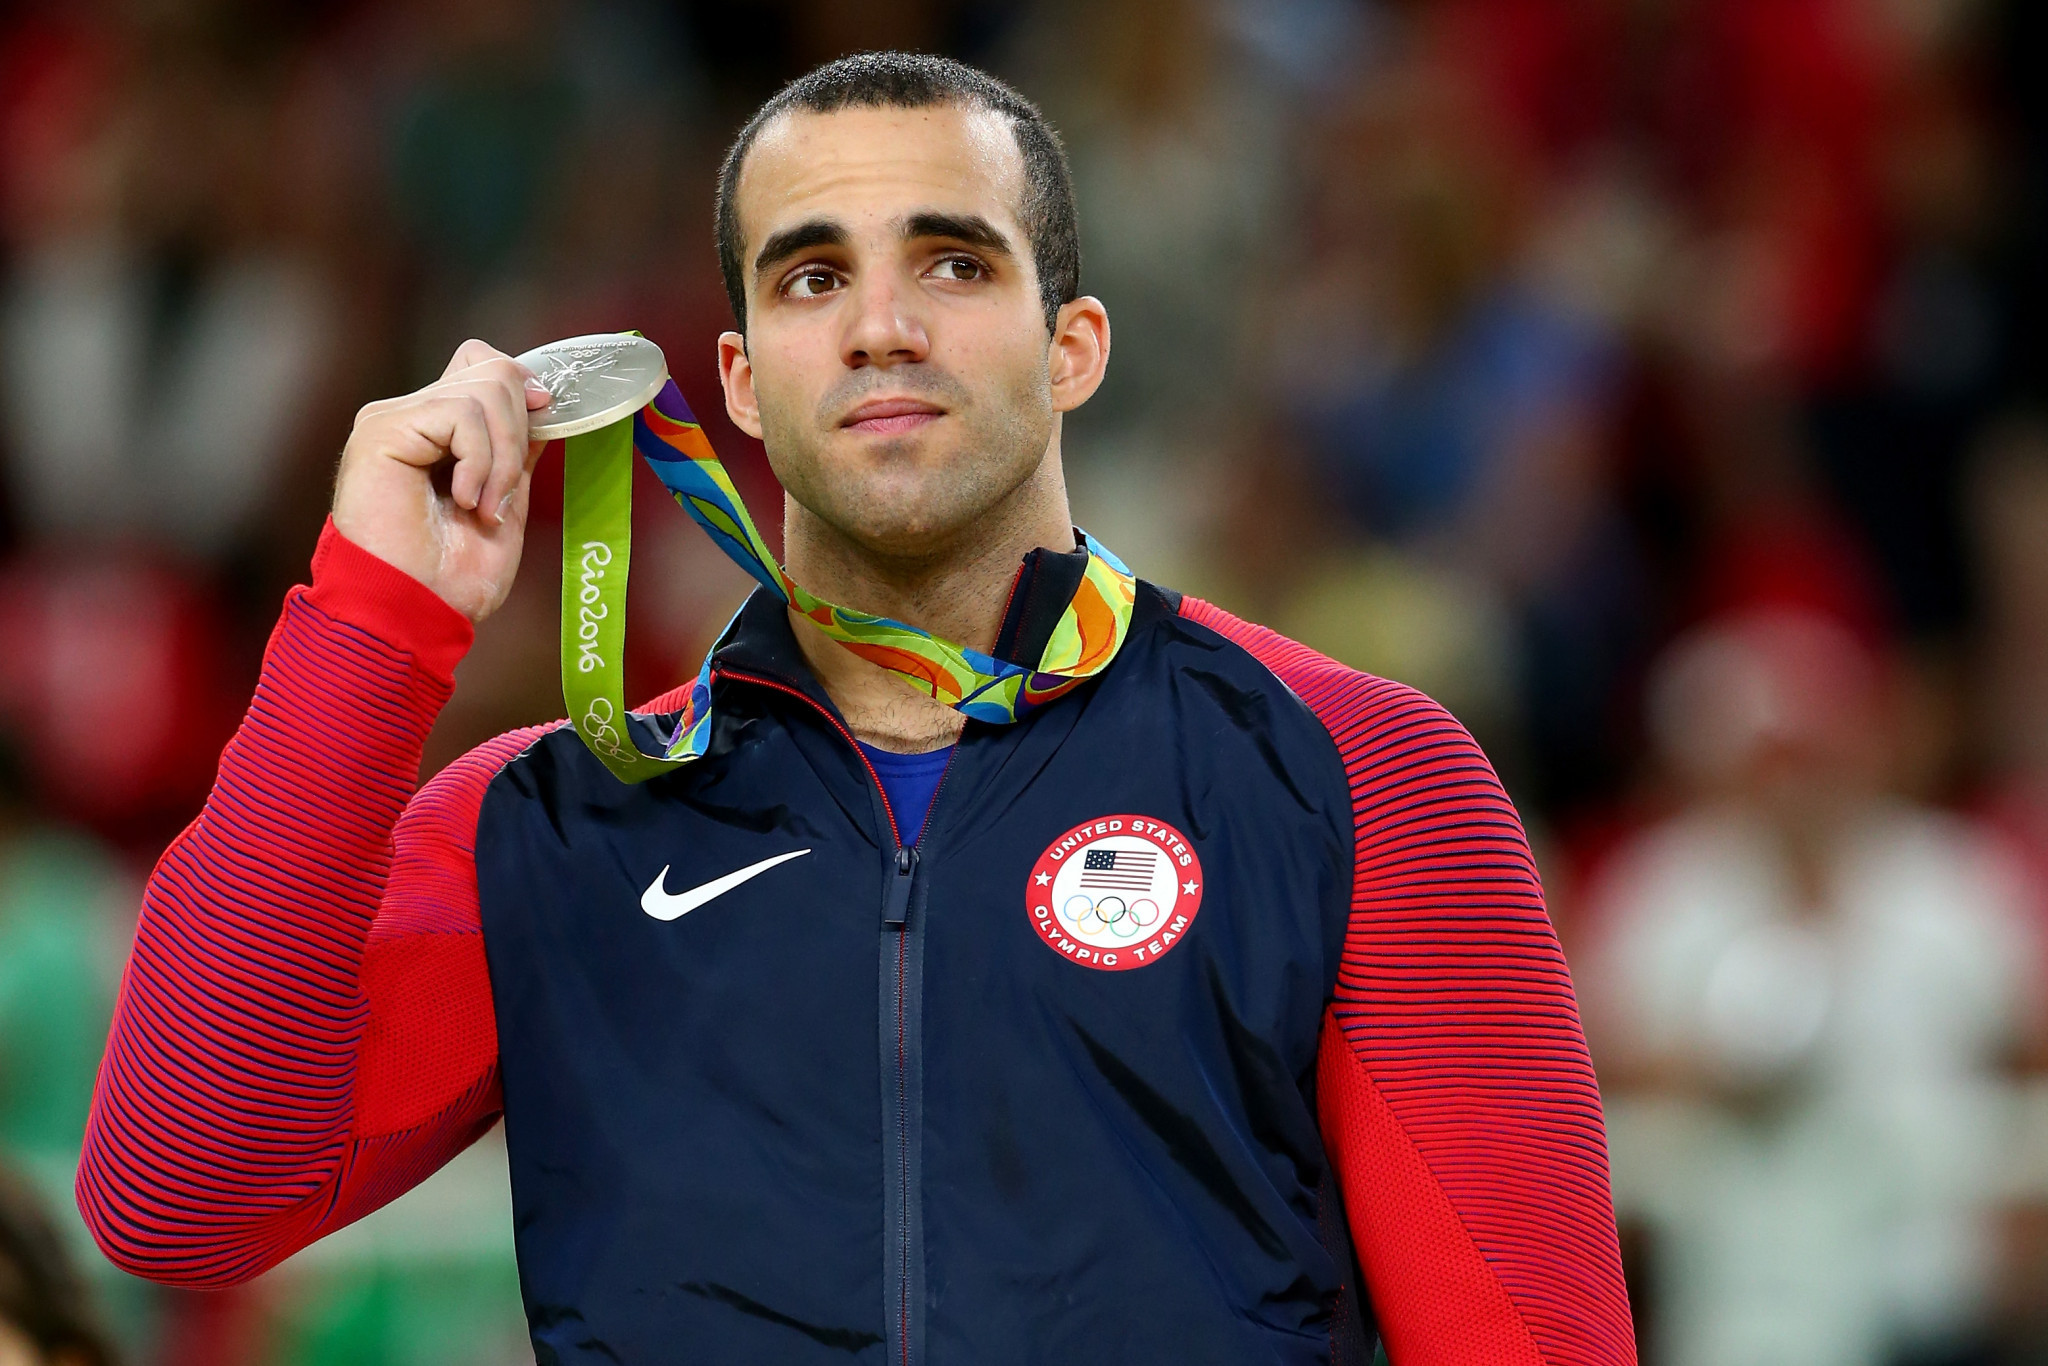 Silver medalist Danell Leyva of the United States celebrates on the podium at the medal ceremony for the Horizontal Bar on Day 11 of the Rio 2016 Olympic Games ©Getty Images